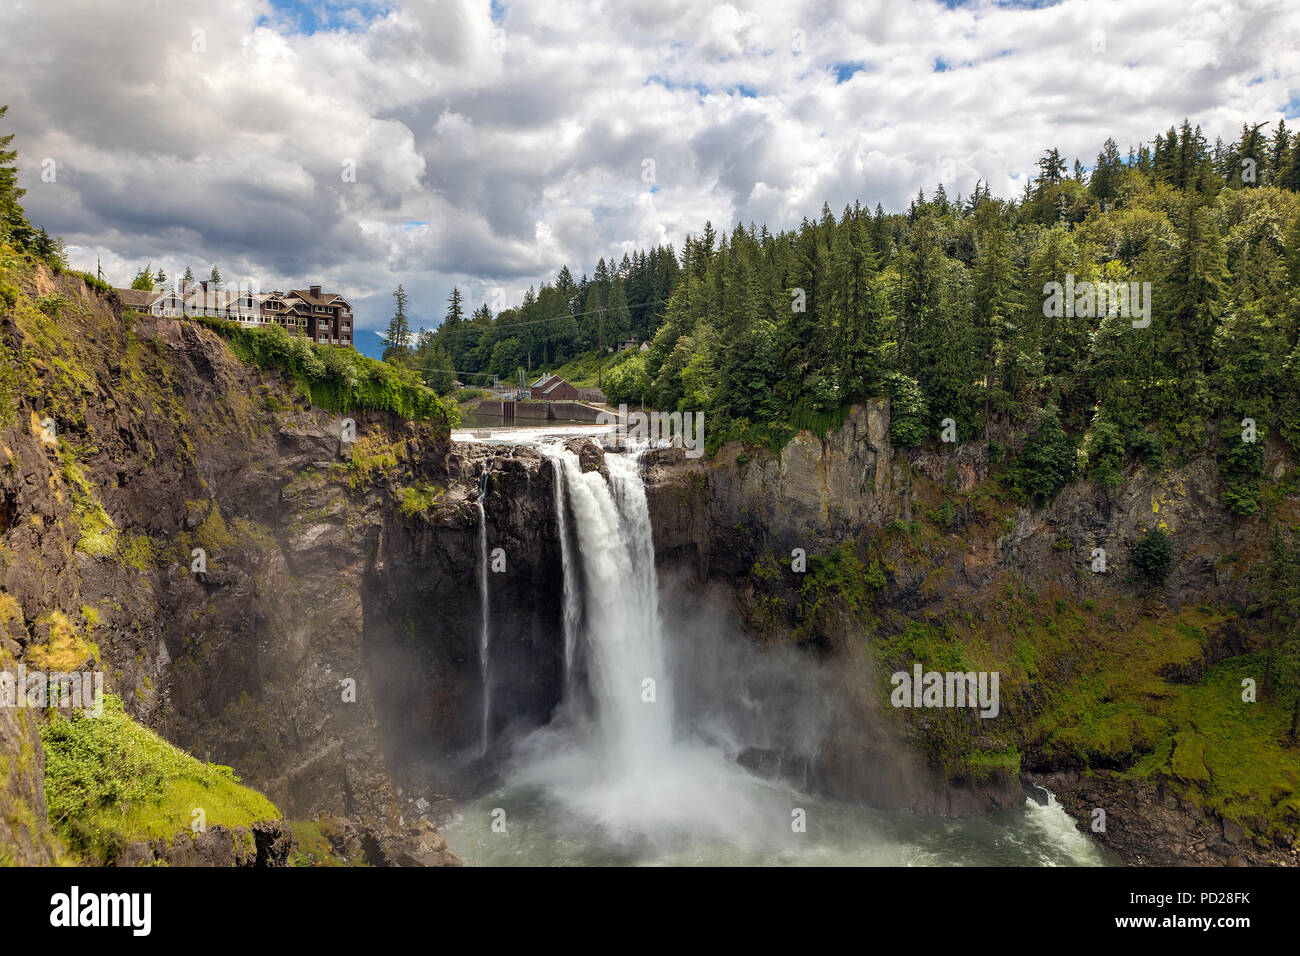 Snoqualmie Falls in Washington State on a cloudy day Stock Photo